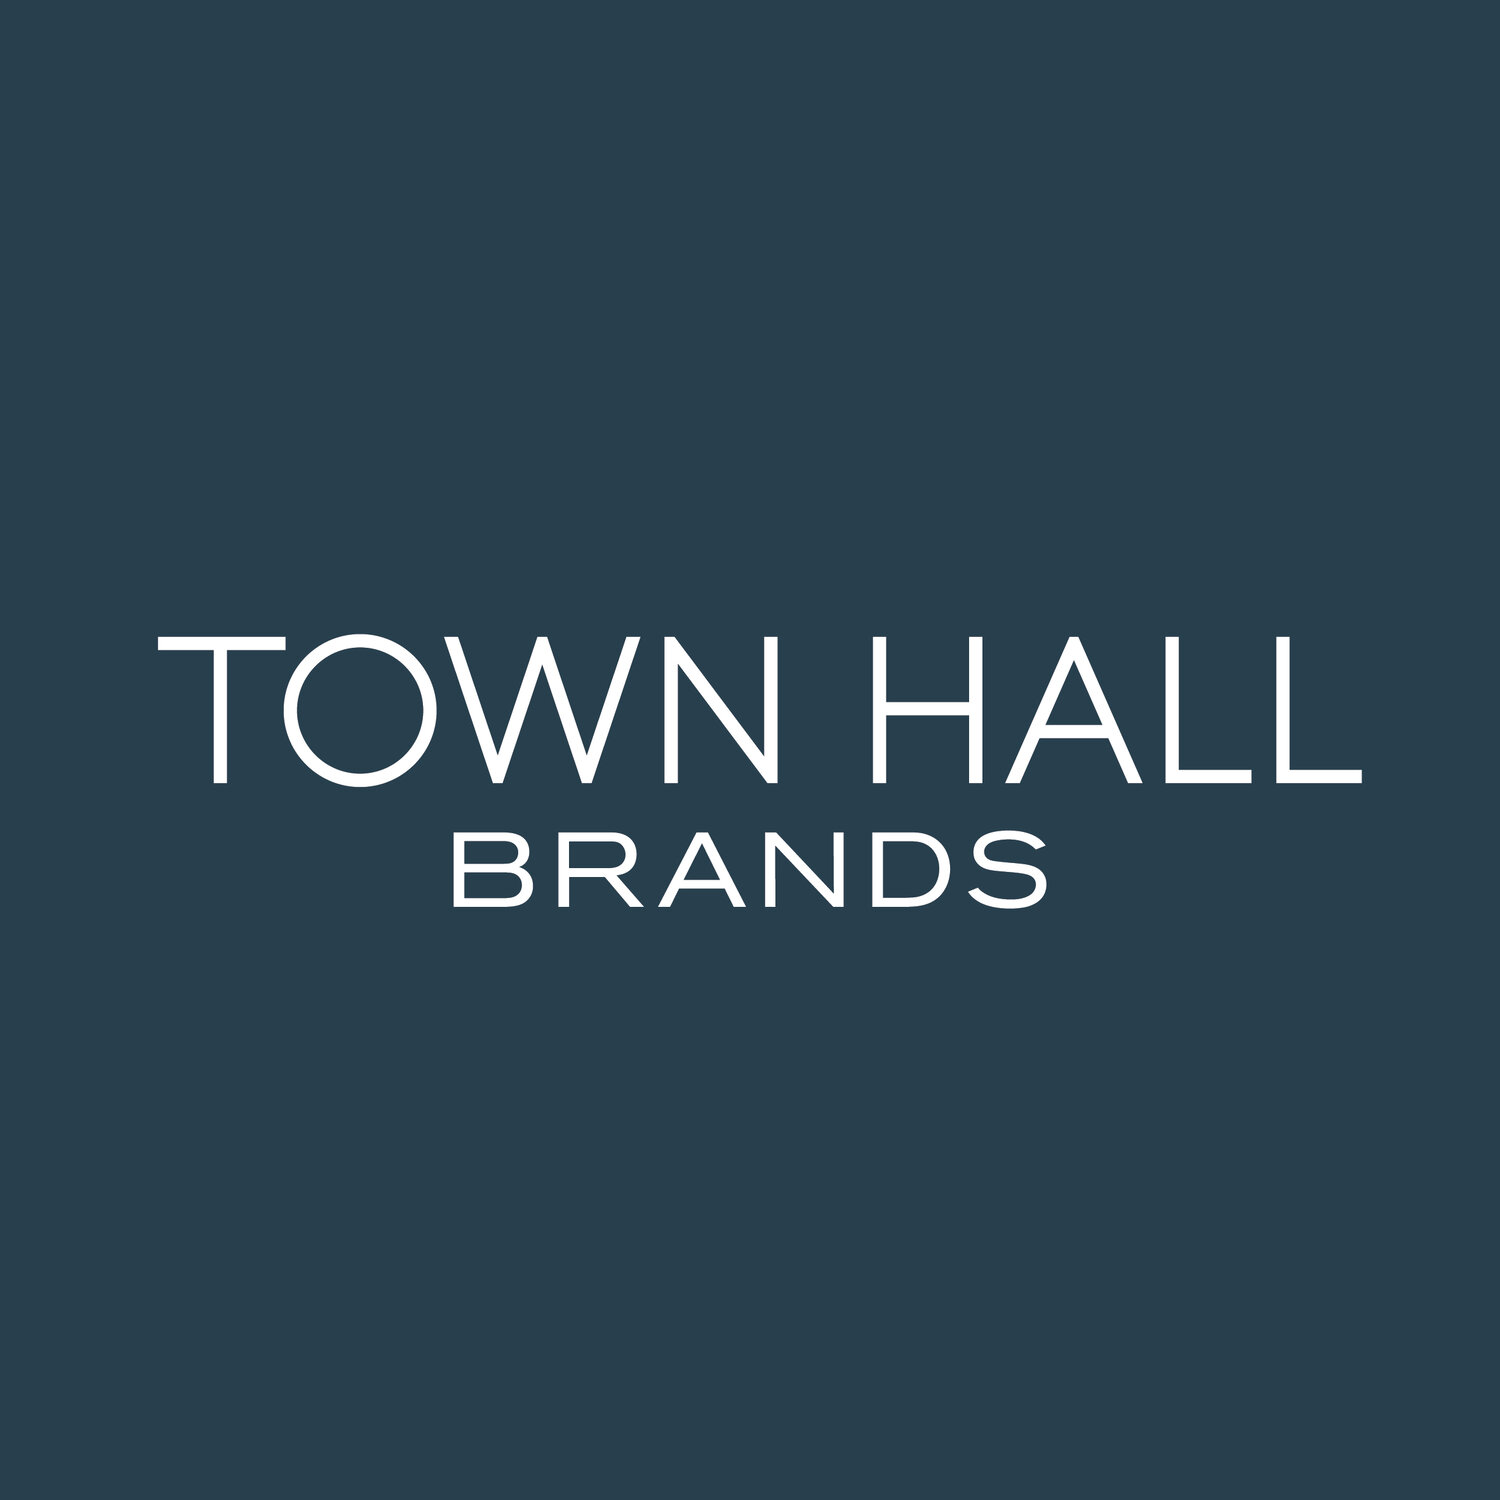 Town Hall Brands: Design & Marketing Agency